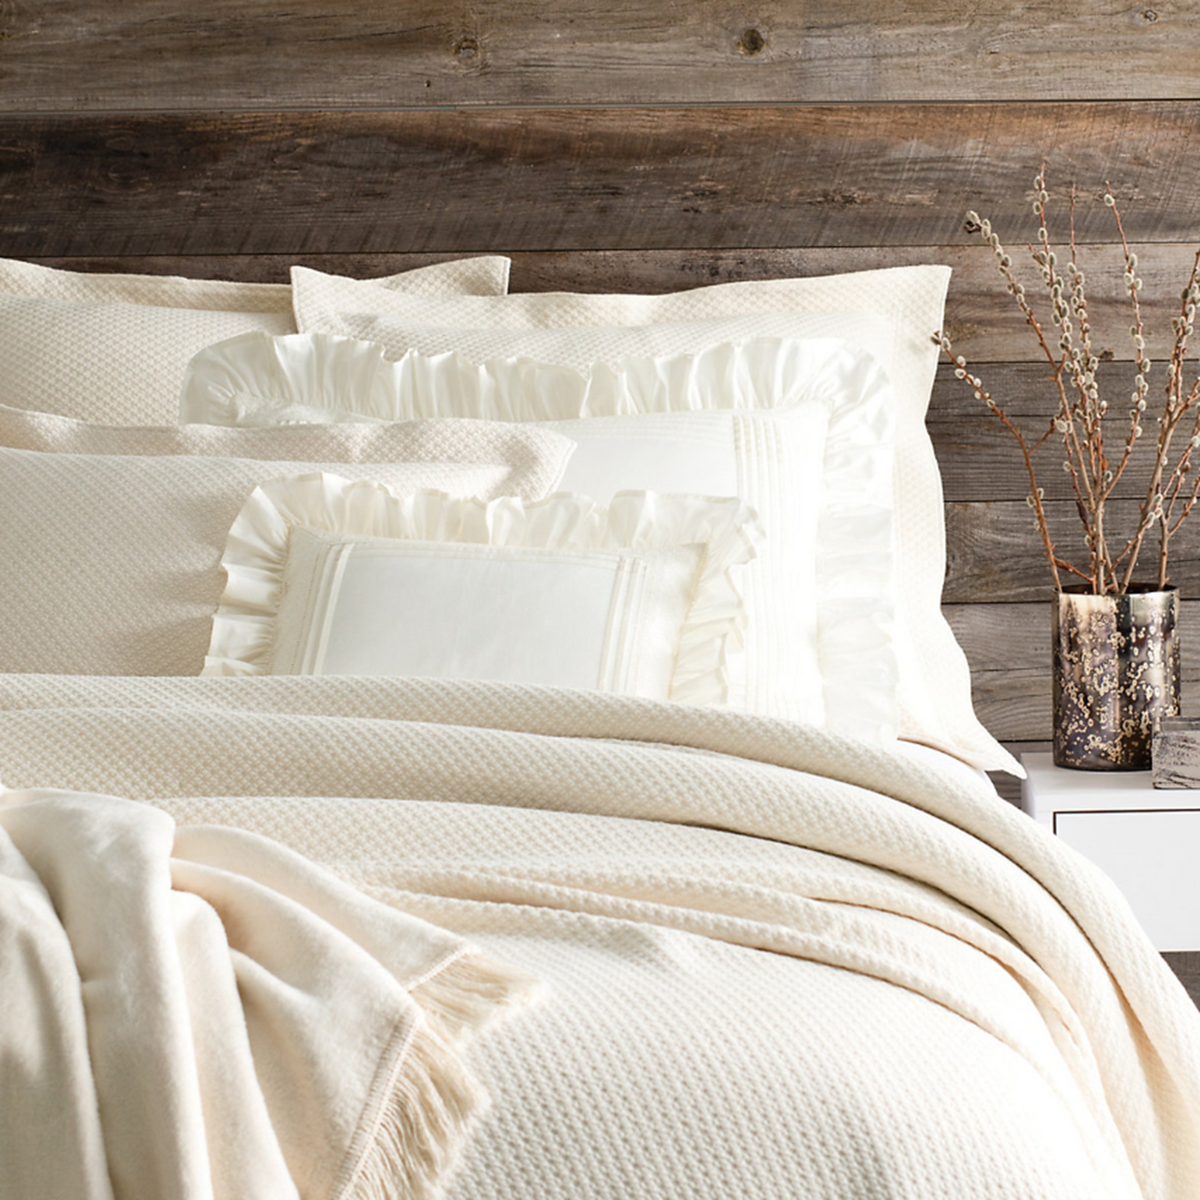 Bed Dressed in Pine Cone Hill Petite Trellis Matelassé Coverlet and Shams in Ivory Color